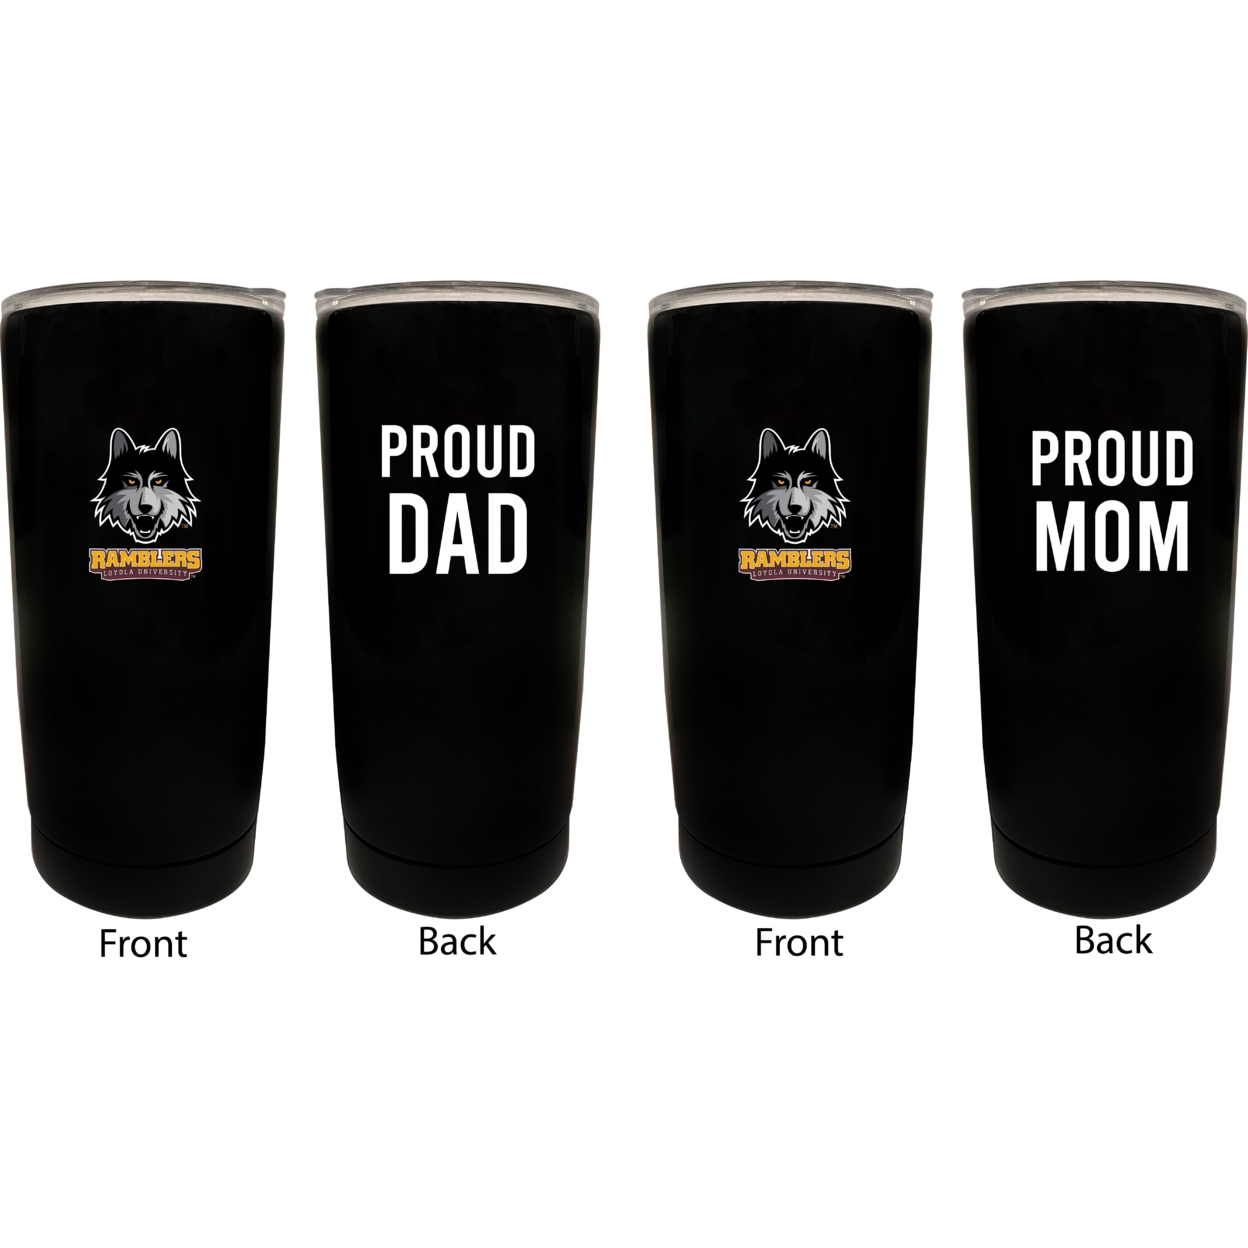 Loyola University Ramblers Proud Mom And Dad 16 Oz Insulated Stainless Steel Tumblers 2 Pack Black.